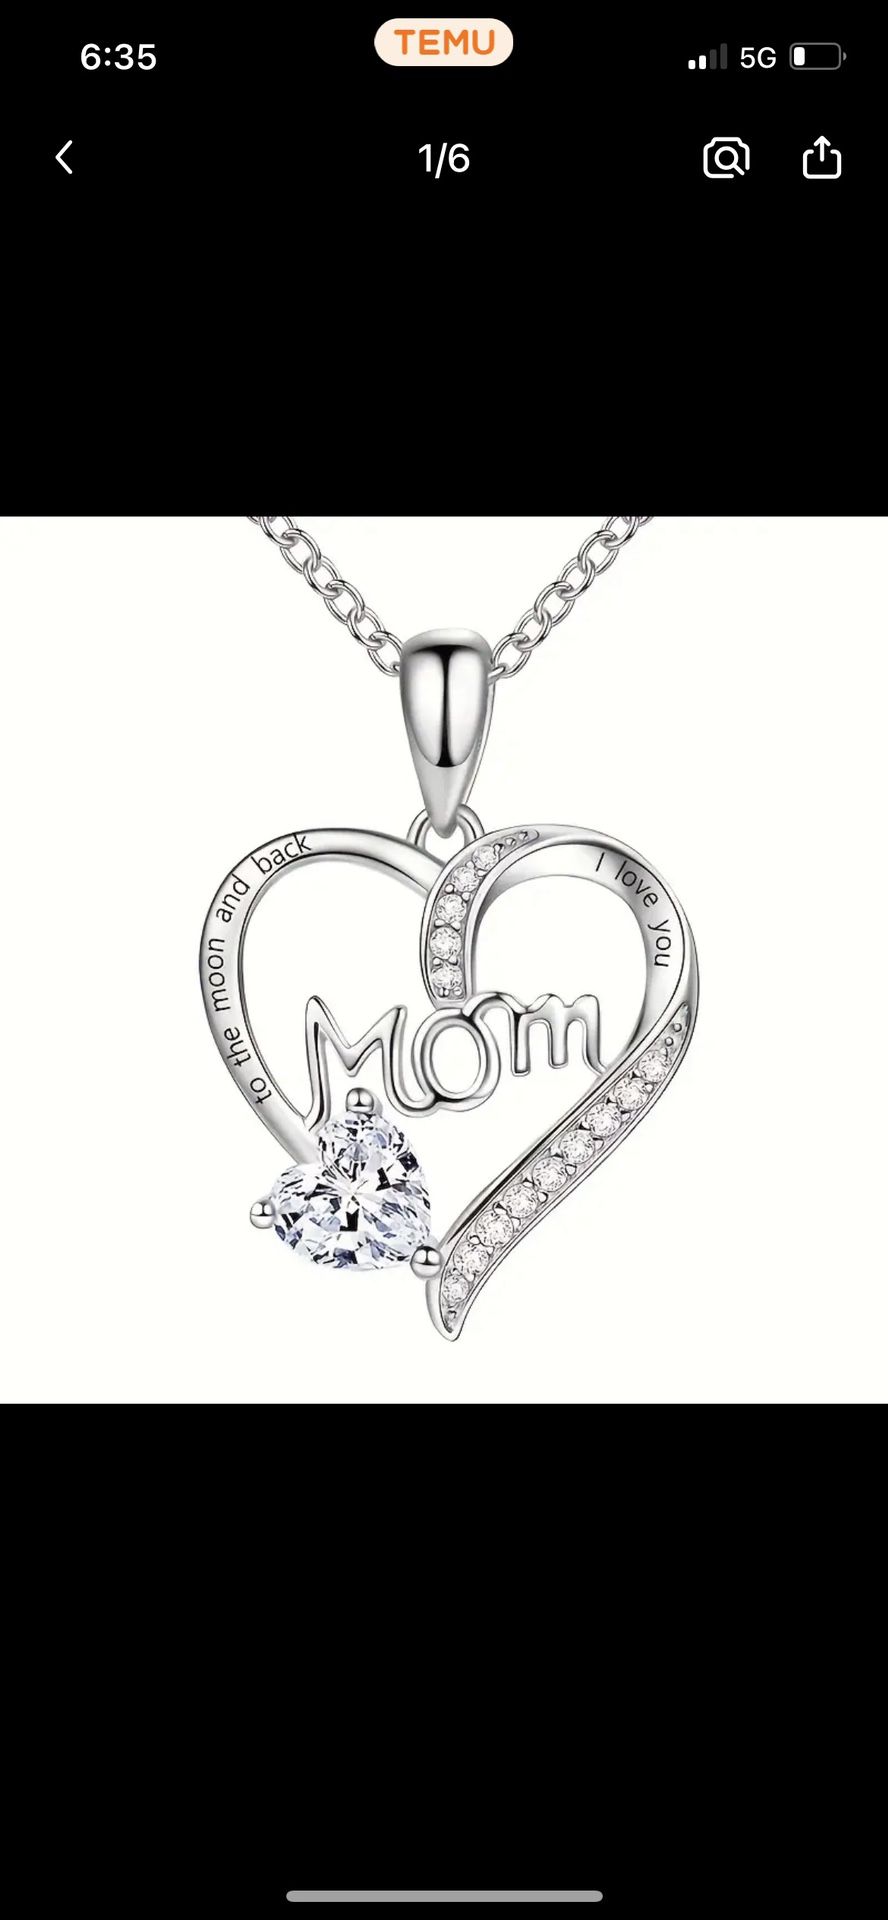 Mom Silver Necklace For Birthday, Mother’s Day Gift Idea